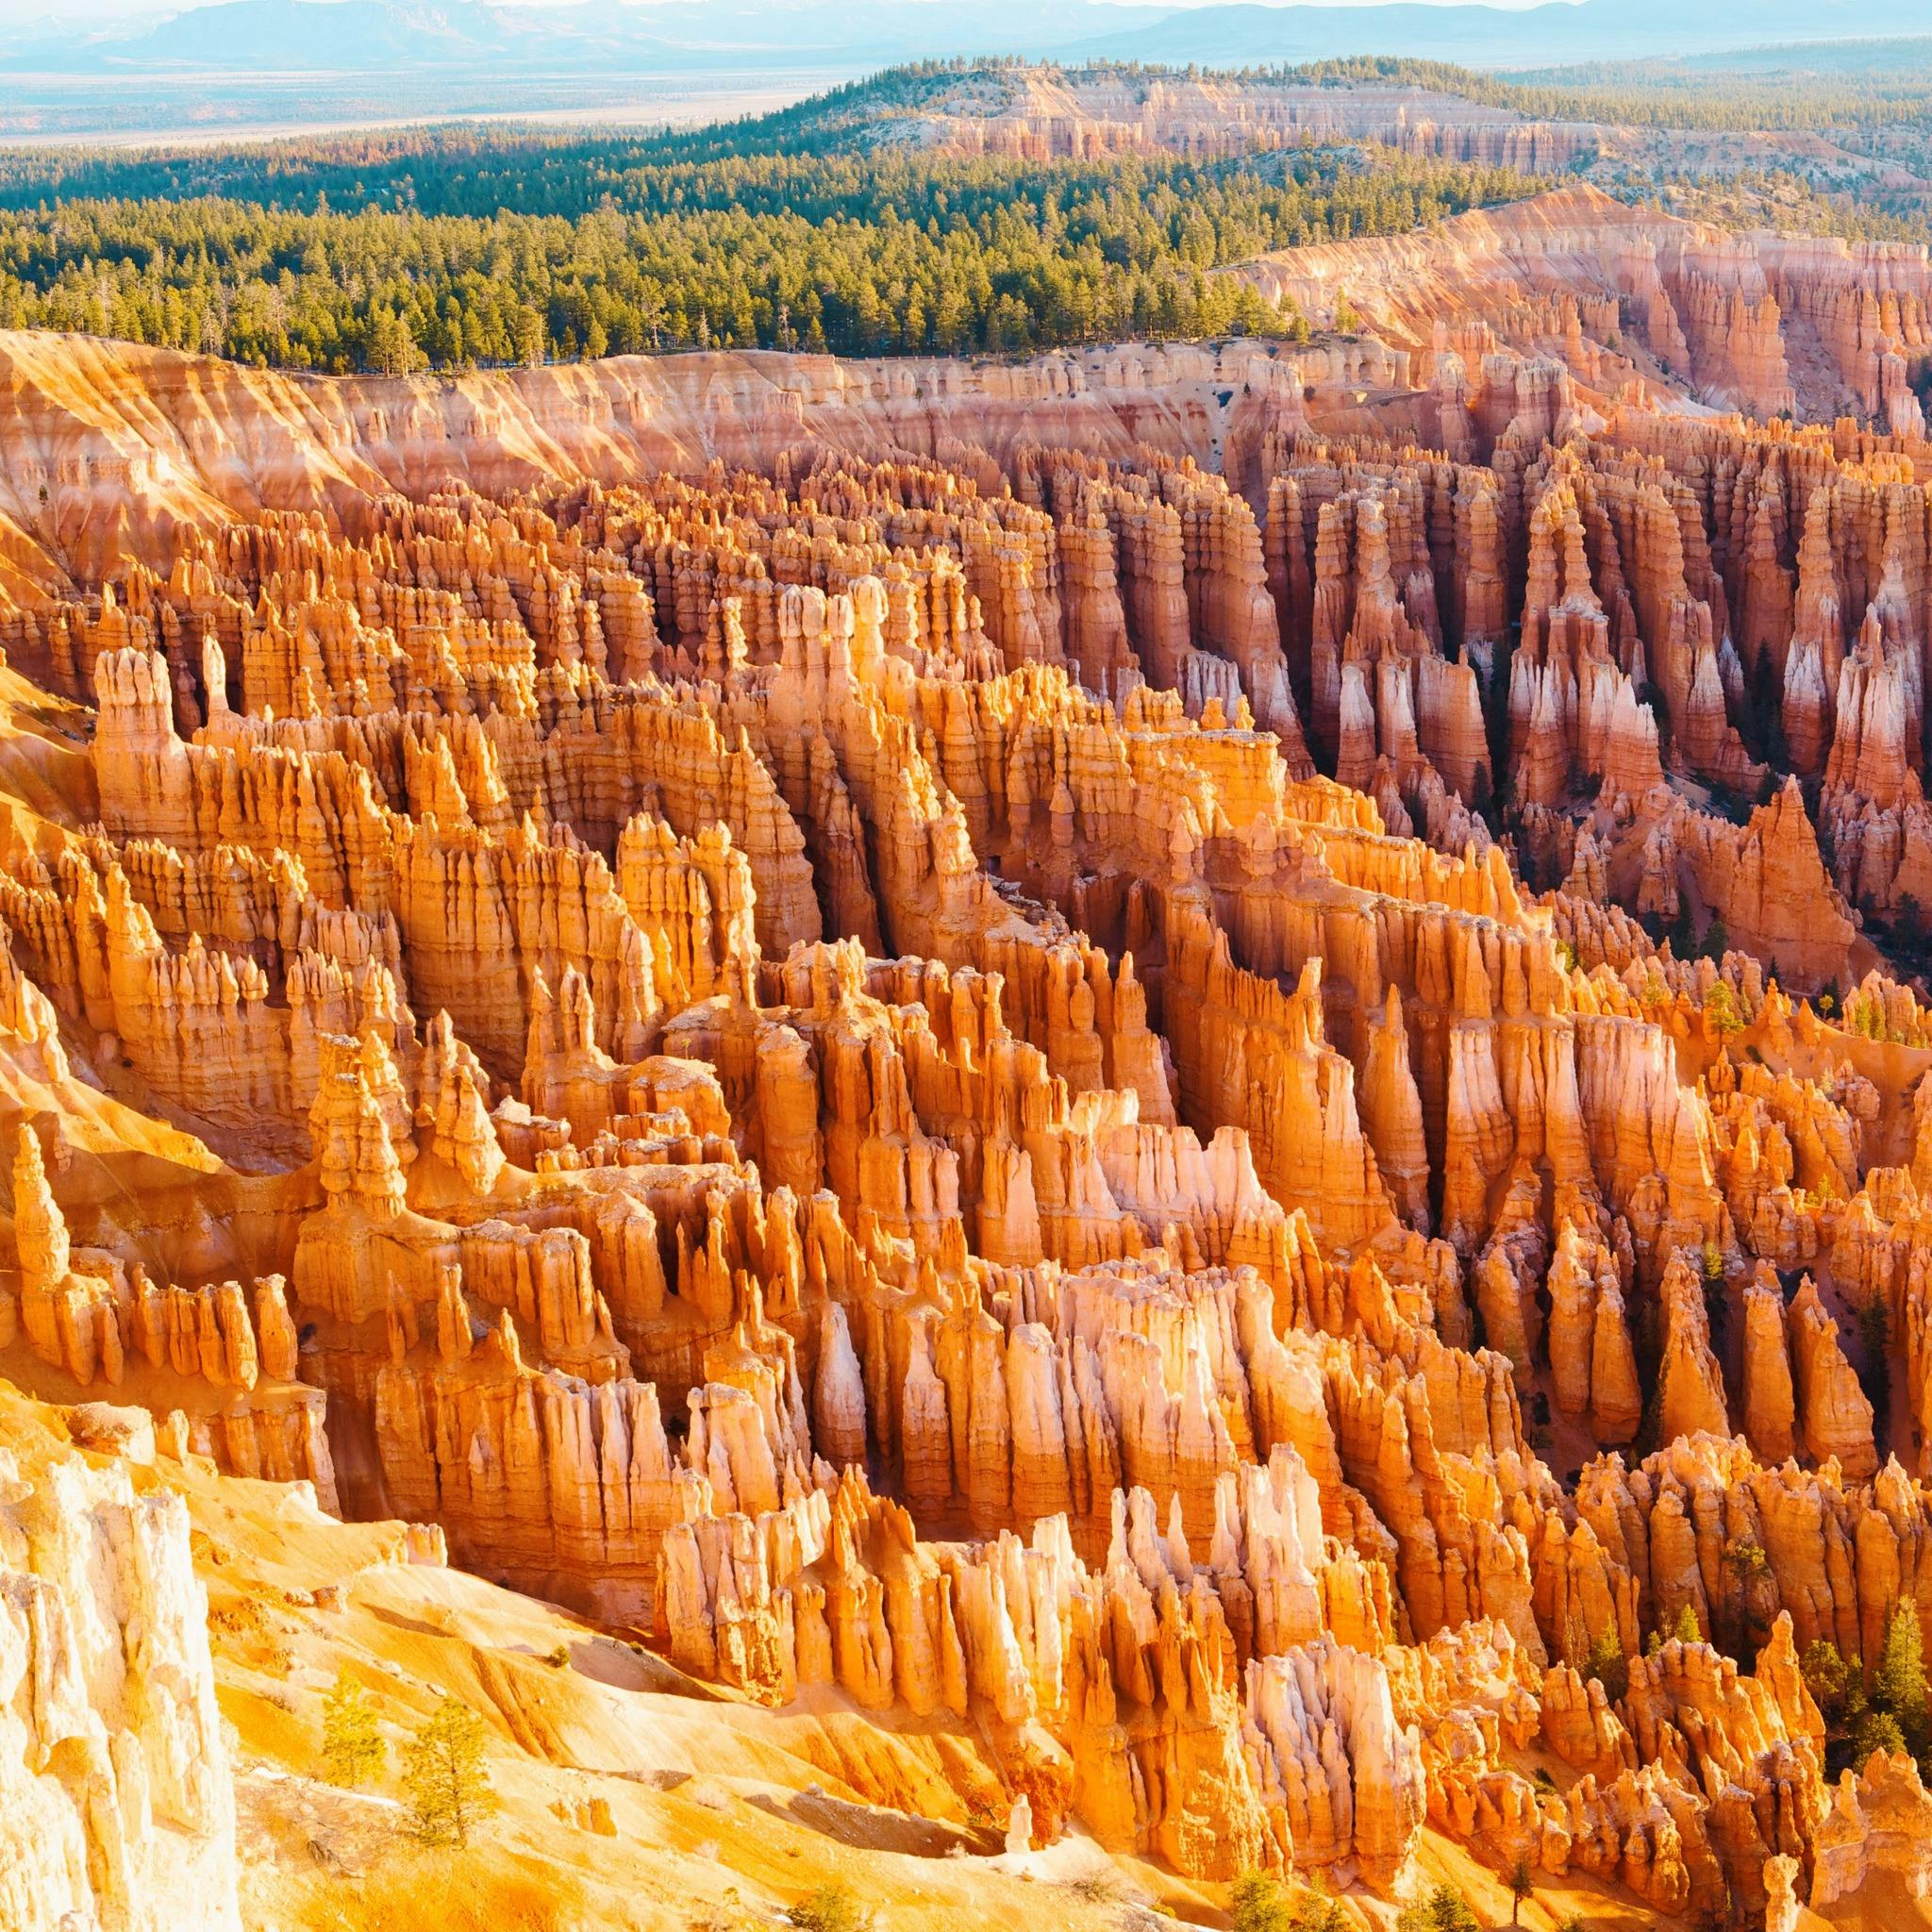 Great view of hoodoos, spires, and fins and fantastic shapes in Bryce Canyon National Park in Utah, USA